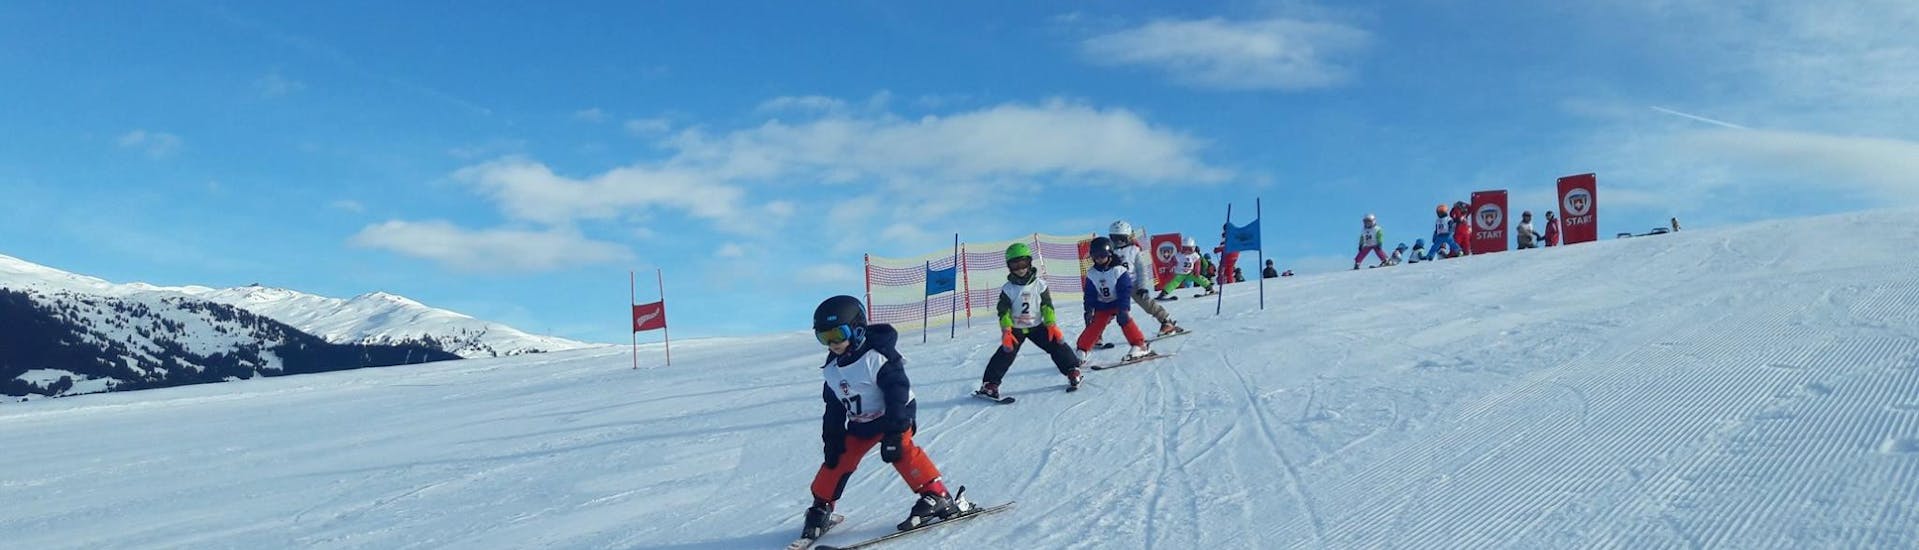 Ski Lessons for Kids (from 4 years) - Full Day - Beginner with Swiss Ski School Obersaxen - Hero image